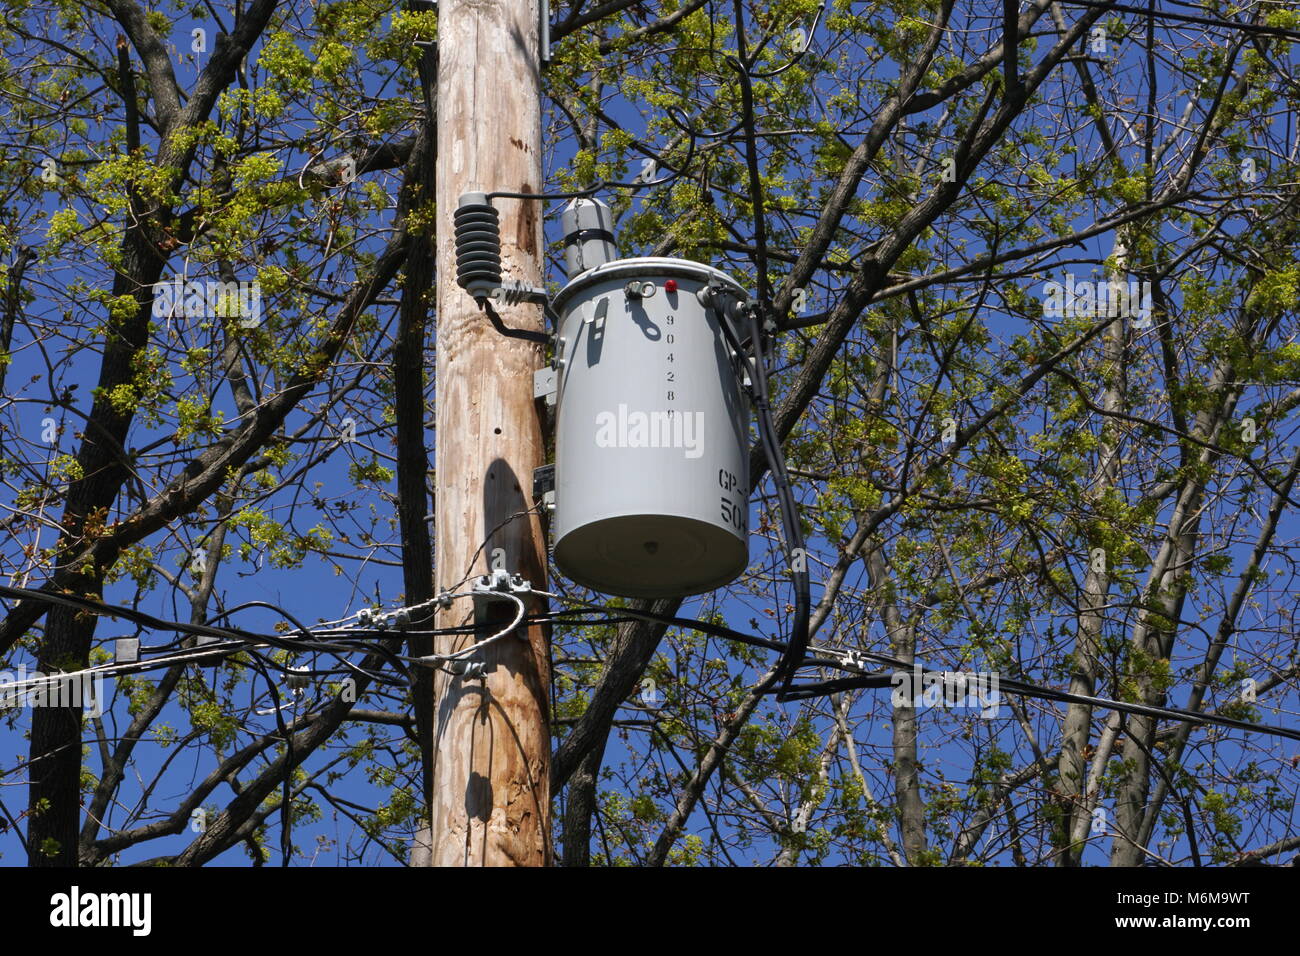 Long Island, NY - April 3, 2016: A PSEG electric transformer sits on a utility pole serving power customers on a spring day Stock Photo